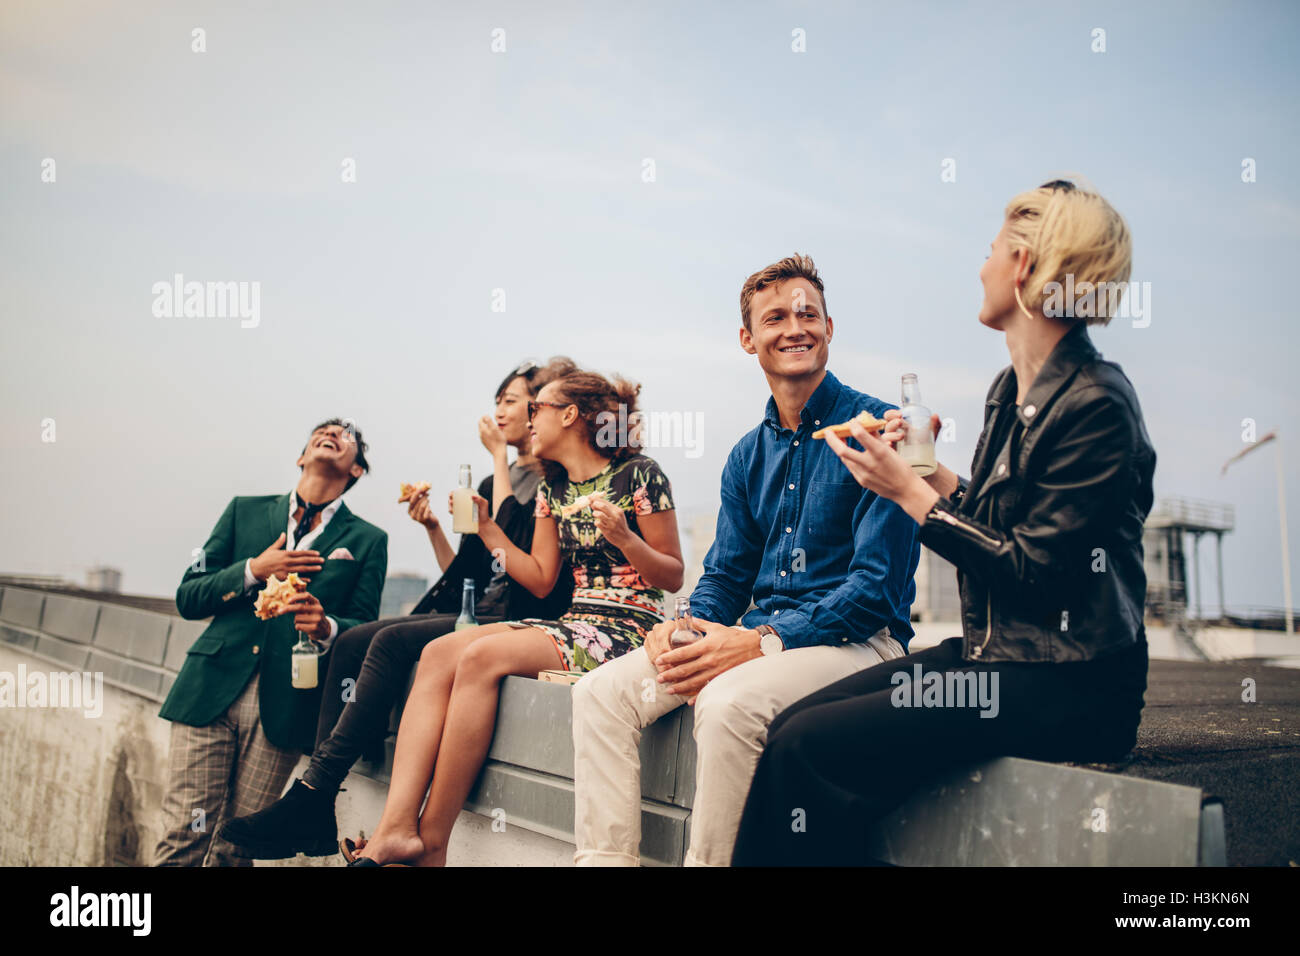 Group of friends partying on terrace, drinking and eating. Young men and women enjoying drinks on rooftop. Stock Photo